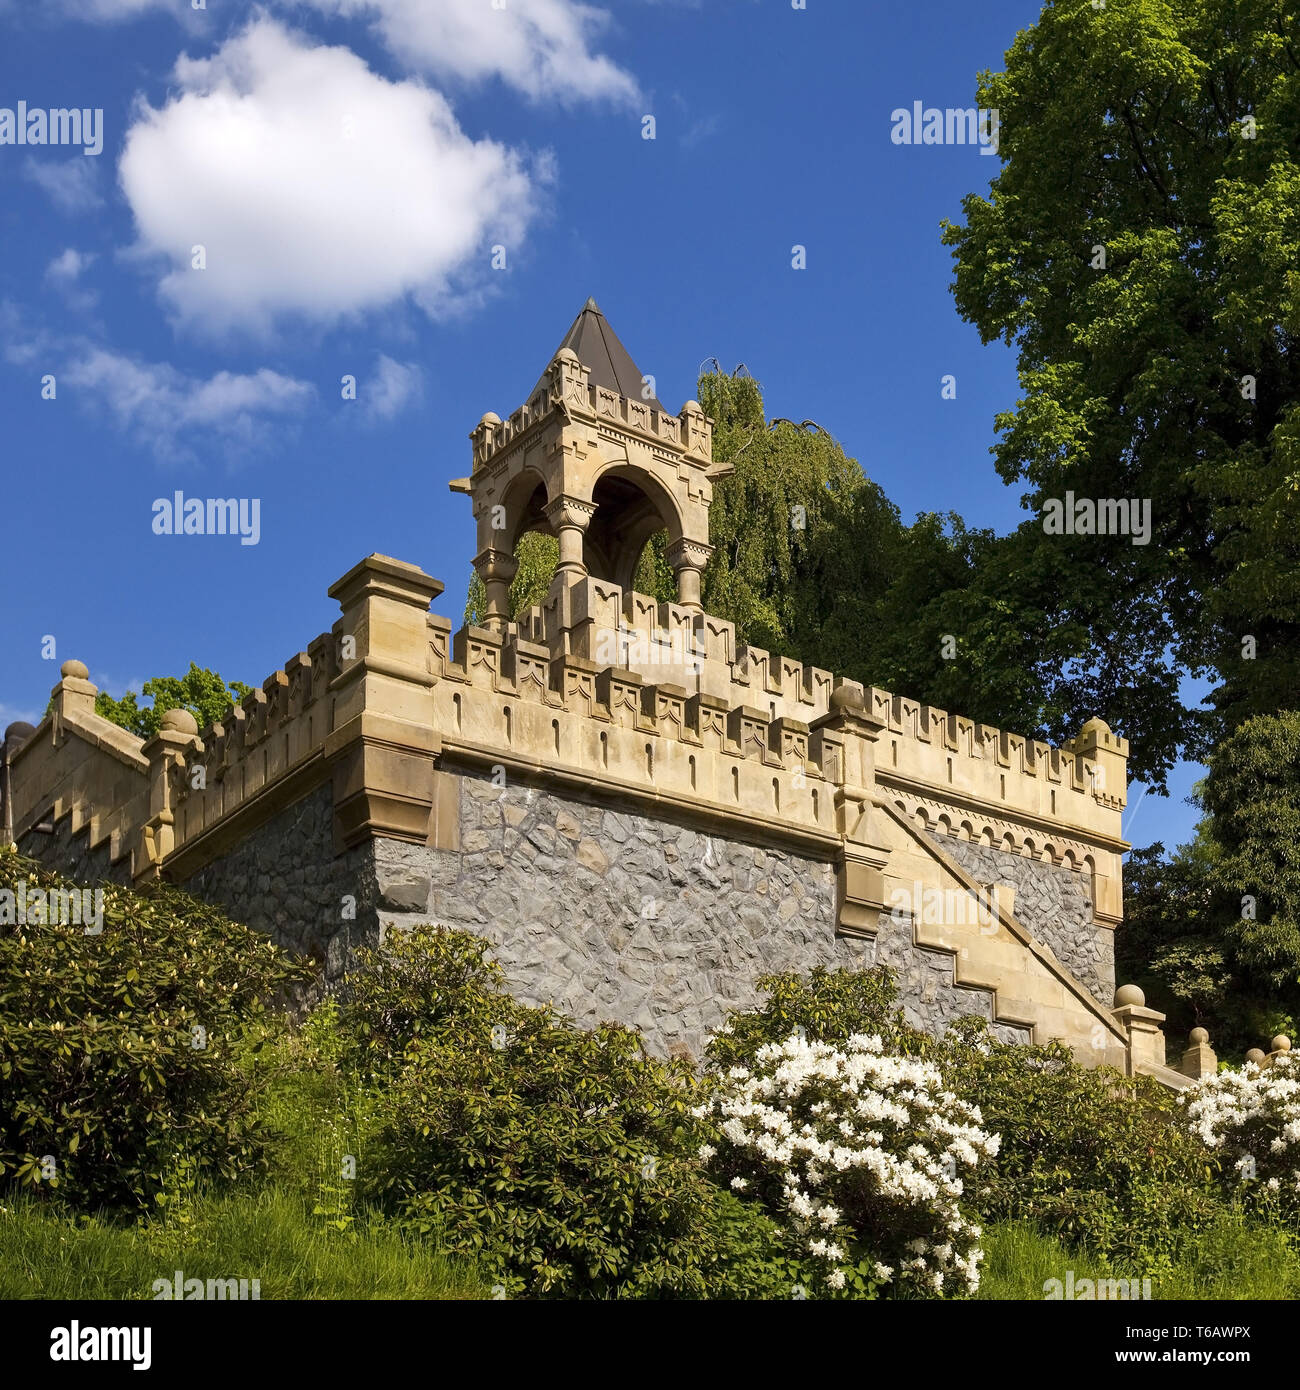 outside staircase Dicke Ibach Treppe in park Barmer Anlagen, Wuppertal, Germany Stock Photo